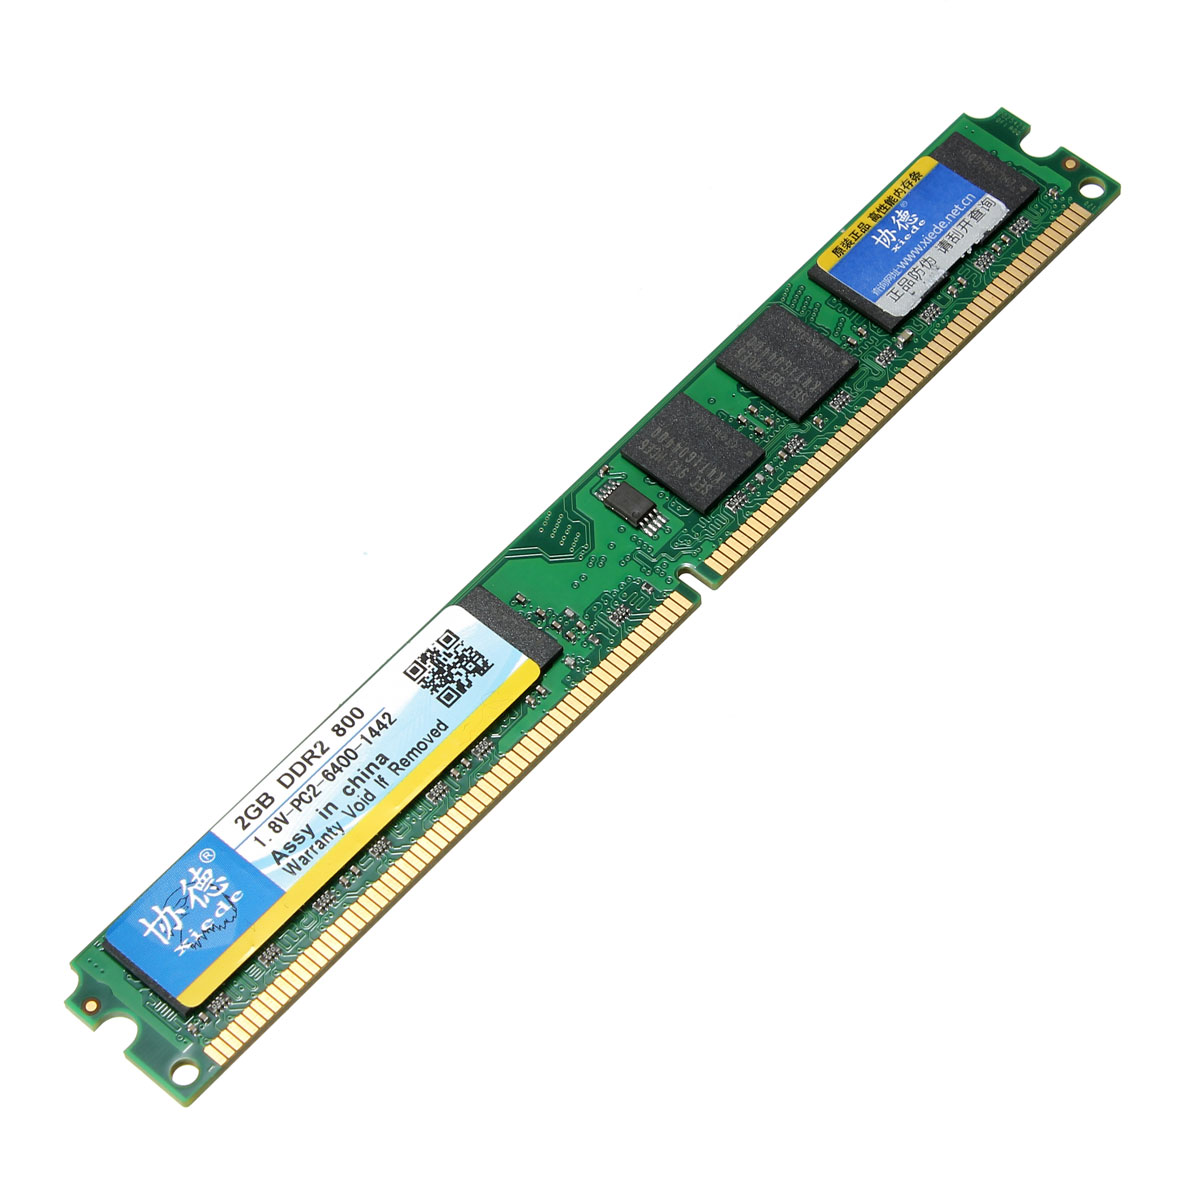 Xiede 2GB DDR2 800 MHZ PC2-6400 in Memory Compatible with 2GB DDR2 800 Memeoy Ram Desktop Computer for AMD